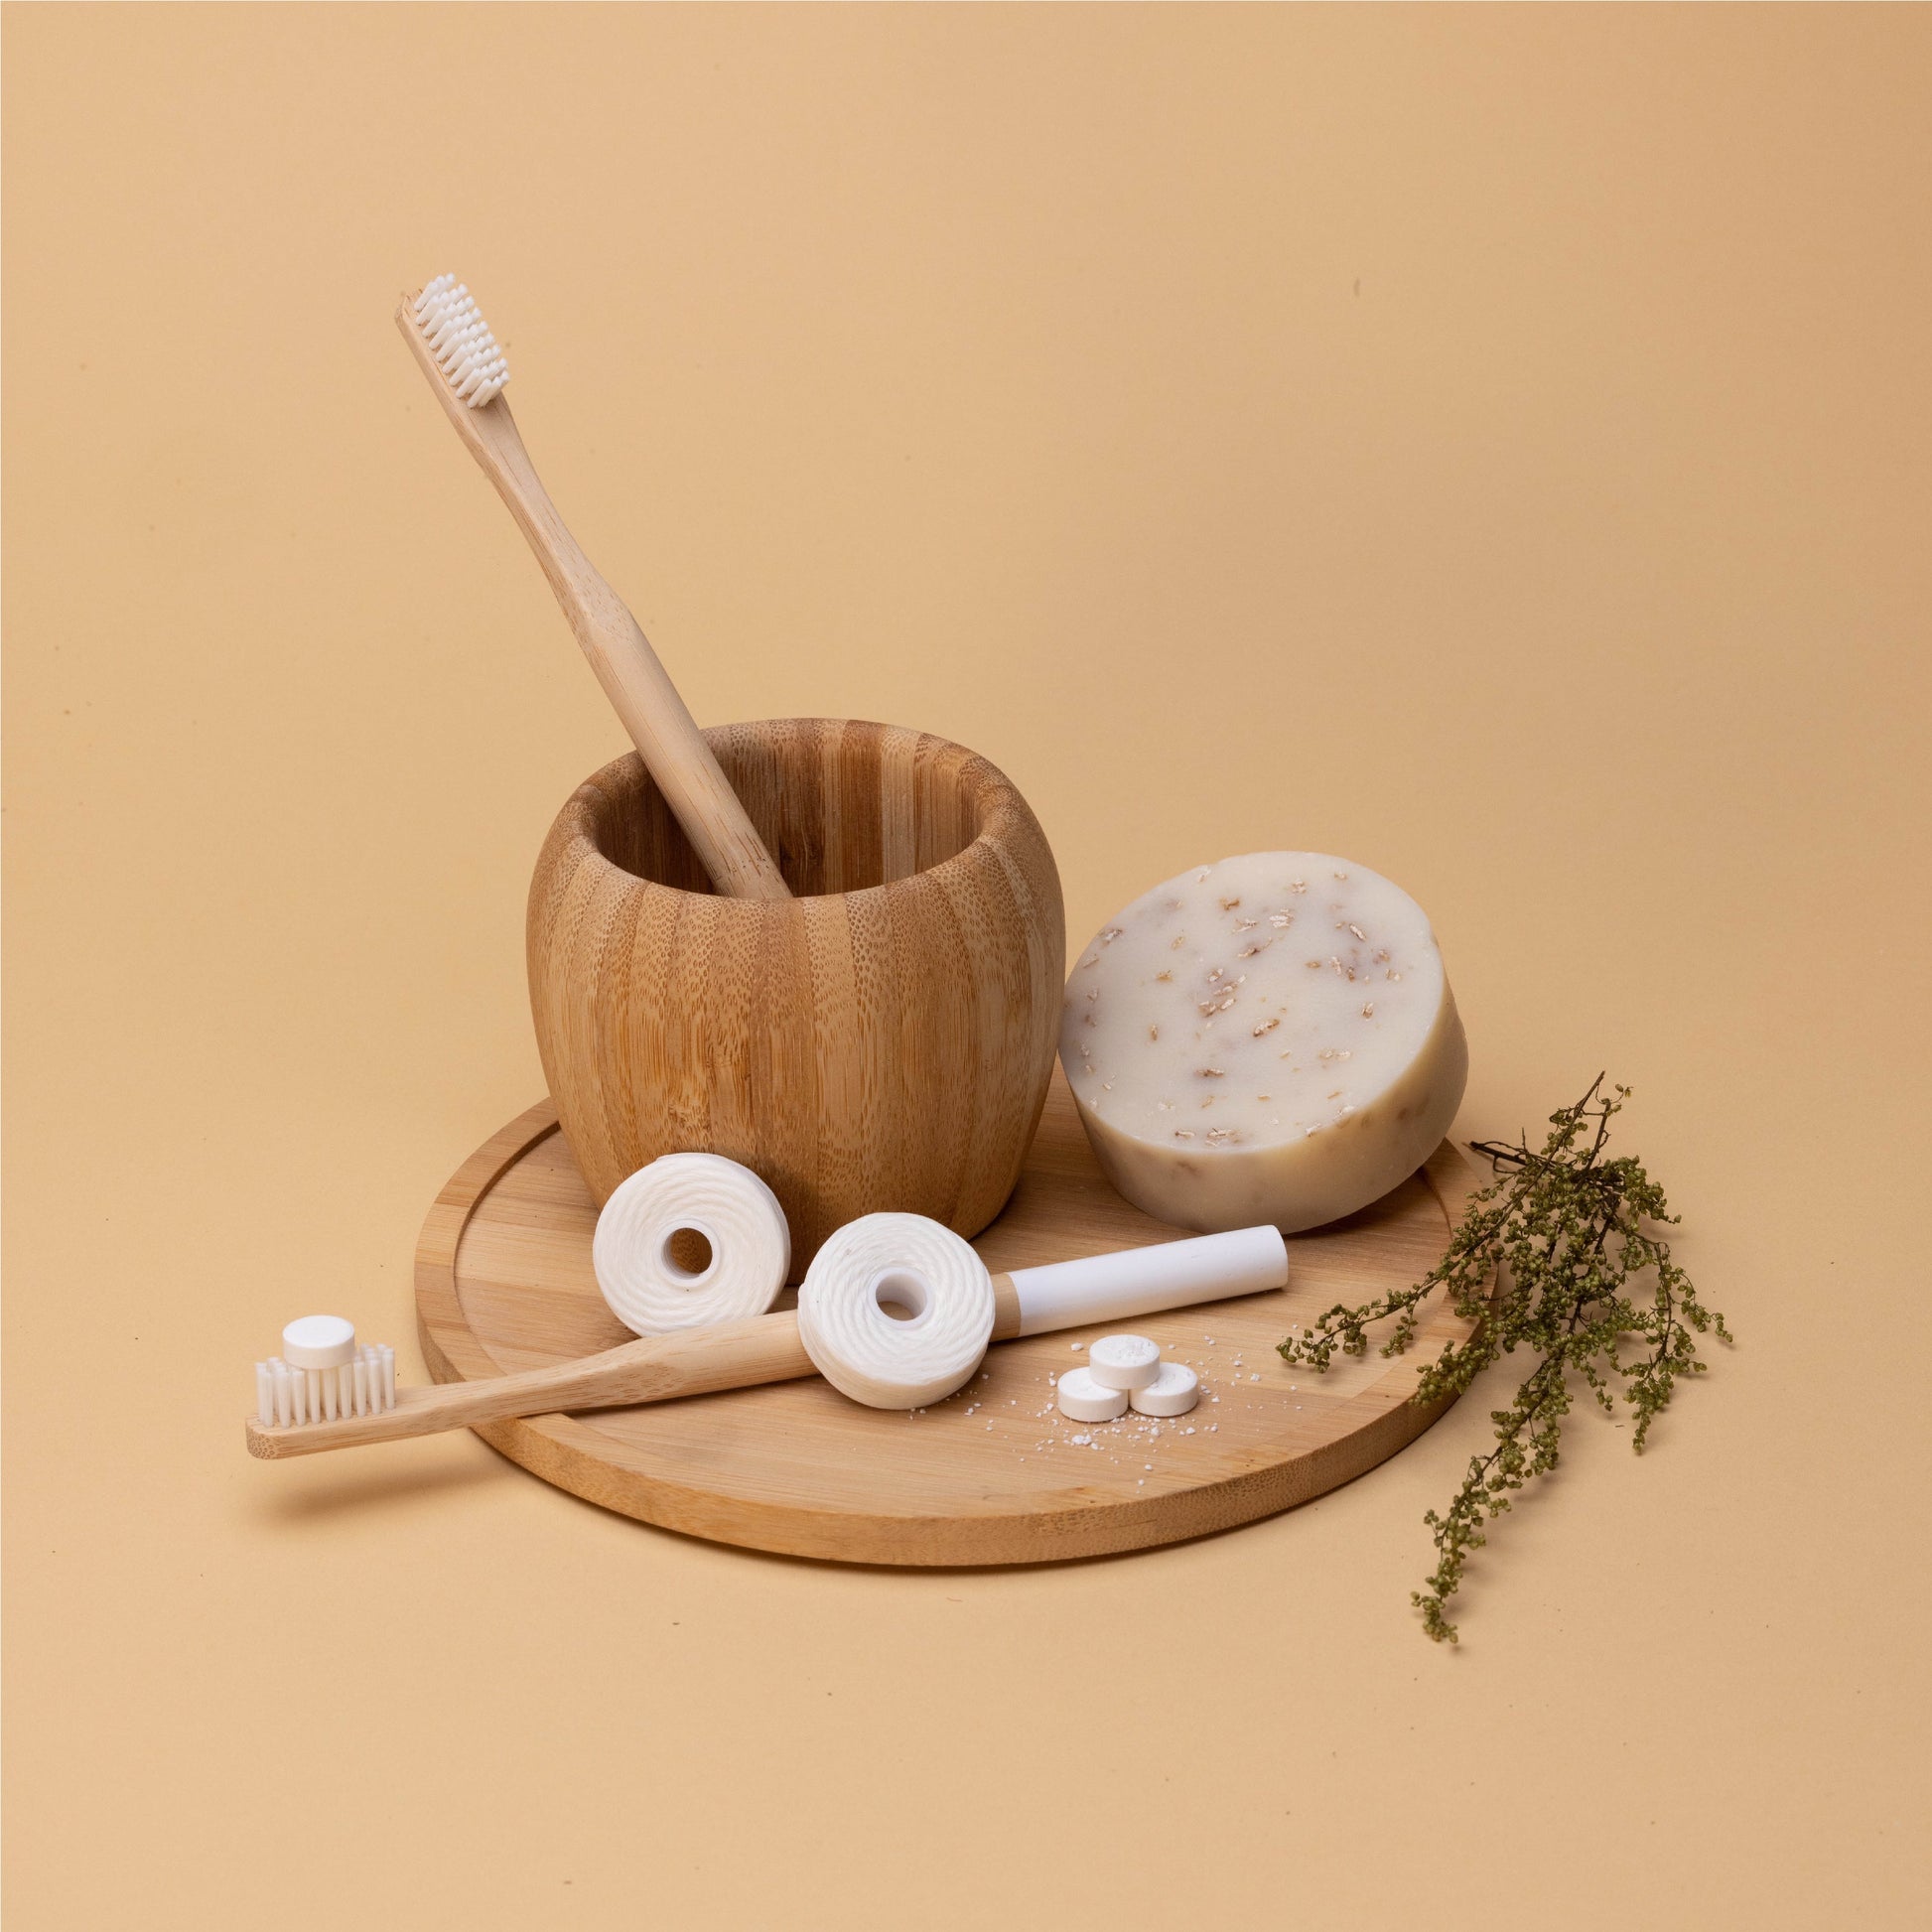 Sustainable Dental Kit with biodegradable bamboo toothbrushes and floss, right angle